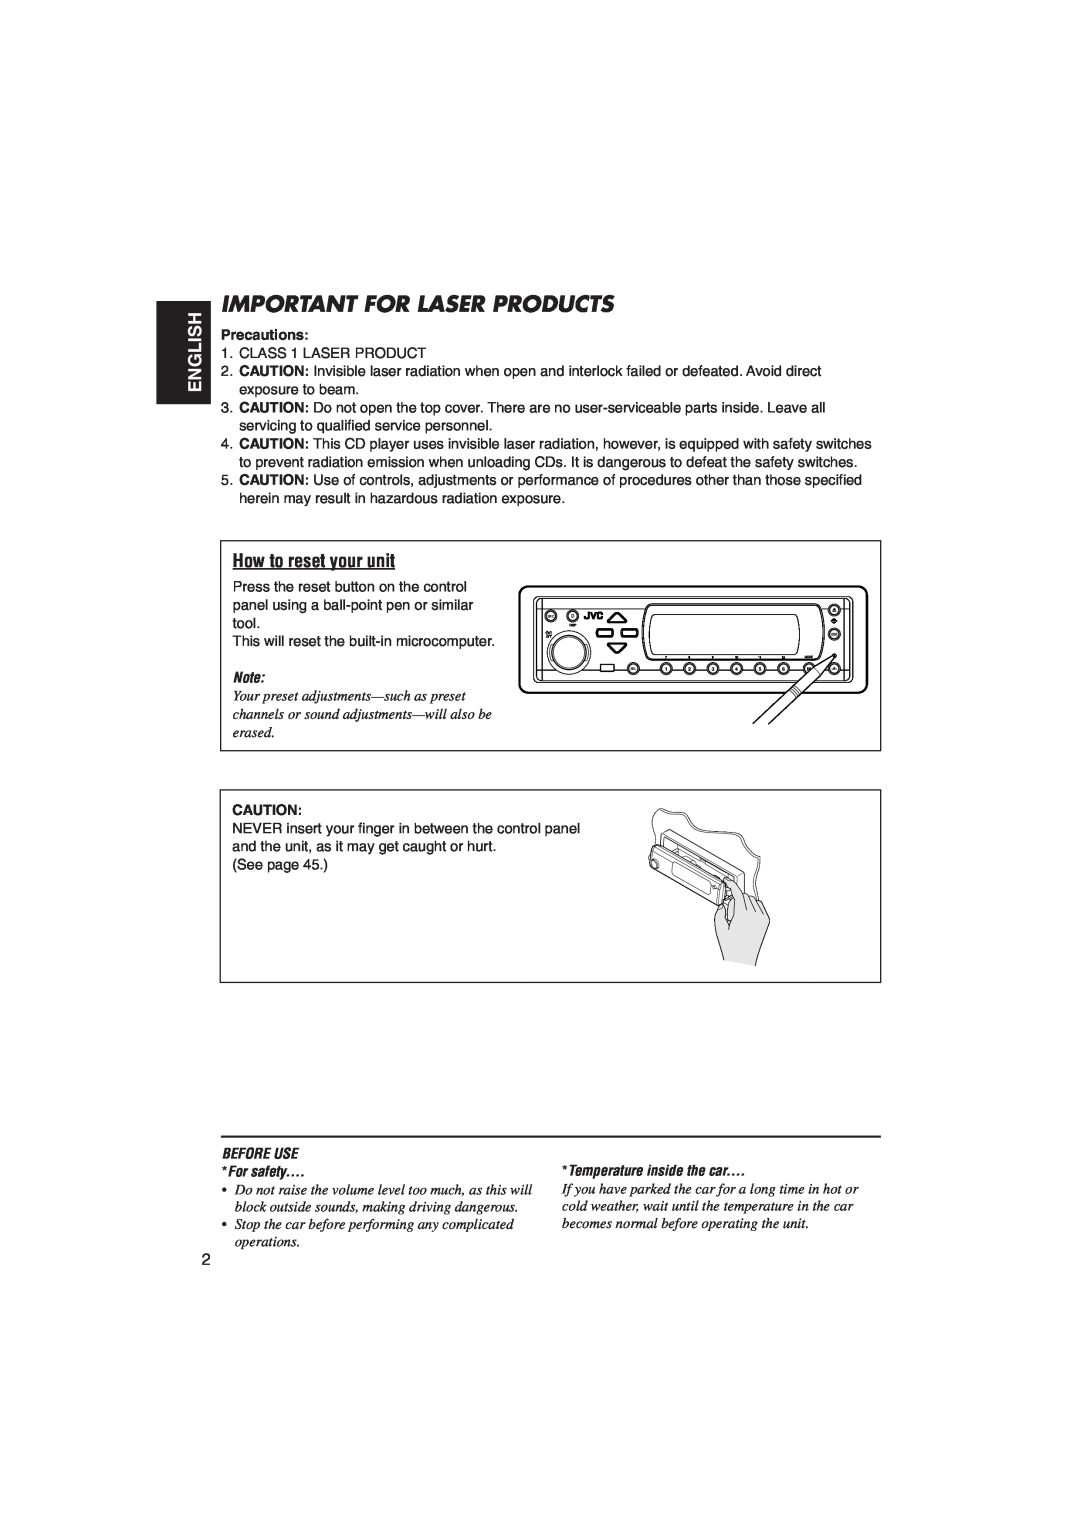 JVC KD-SH9105 manual Important For Laser Products, English, How to reset your unit, Precautions, BEFORE USE For safety 